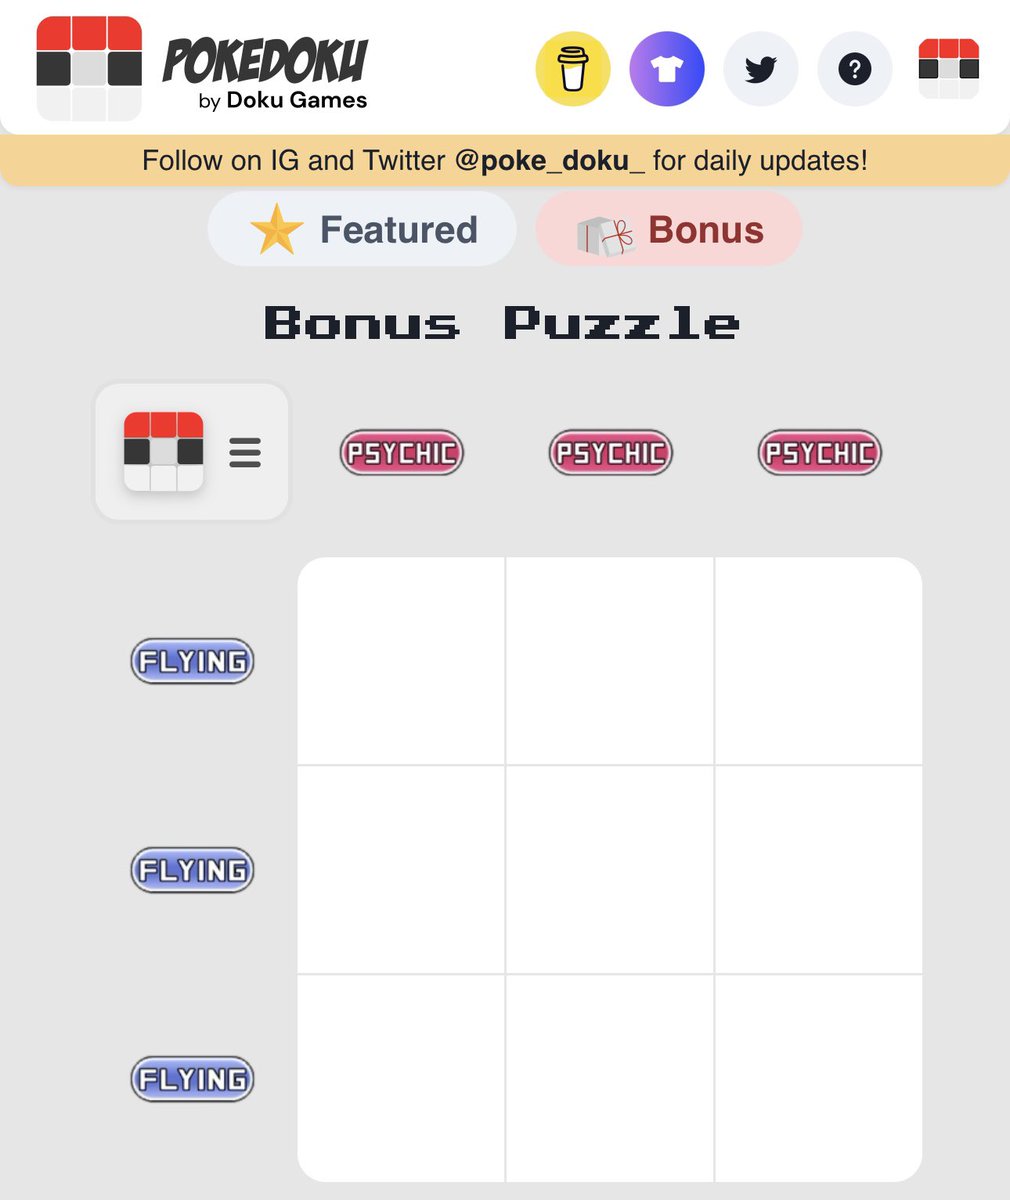 Shoutout @RTGameCrowd for today’s awesome Master Puzzle! Happy April Fool’s Day!